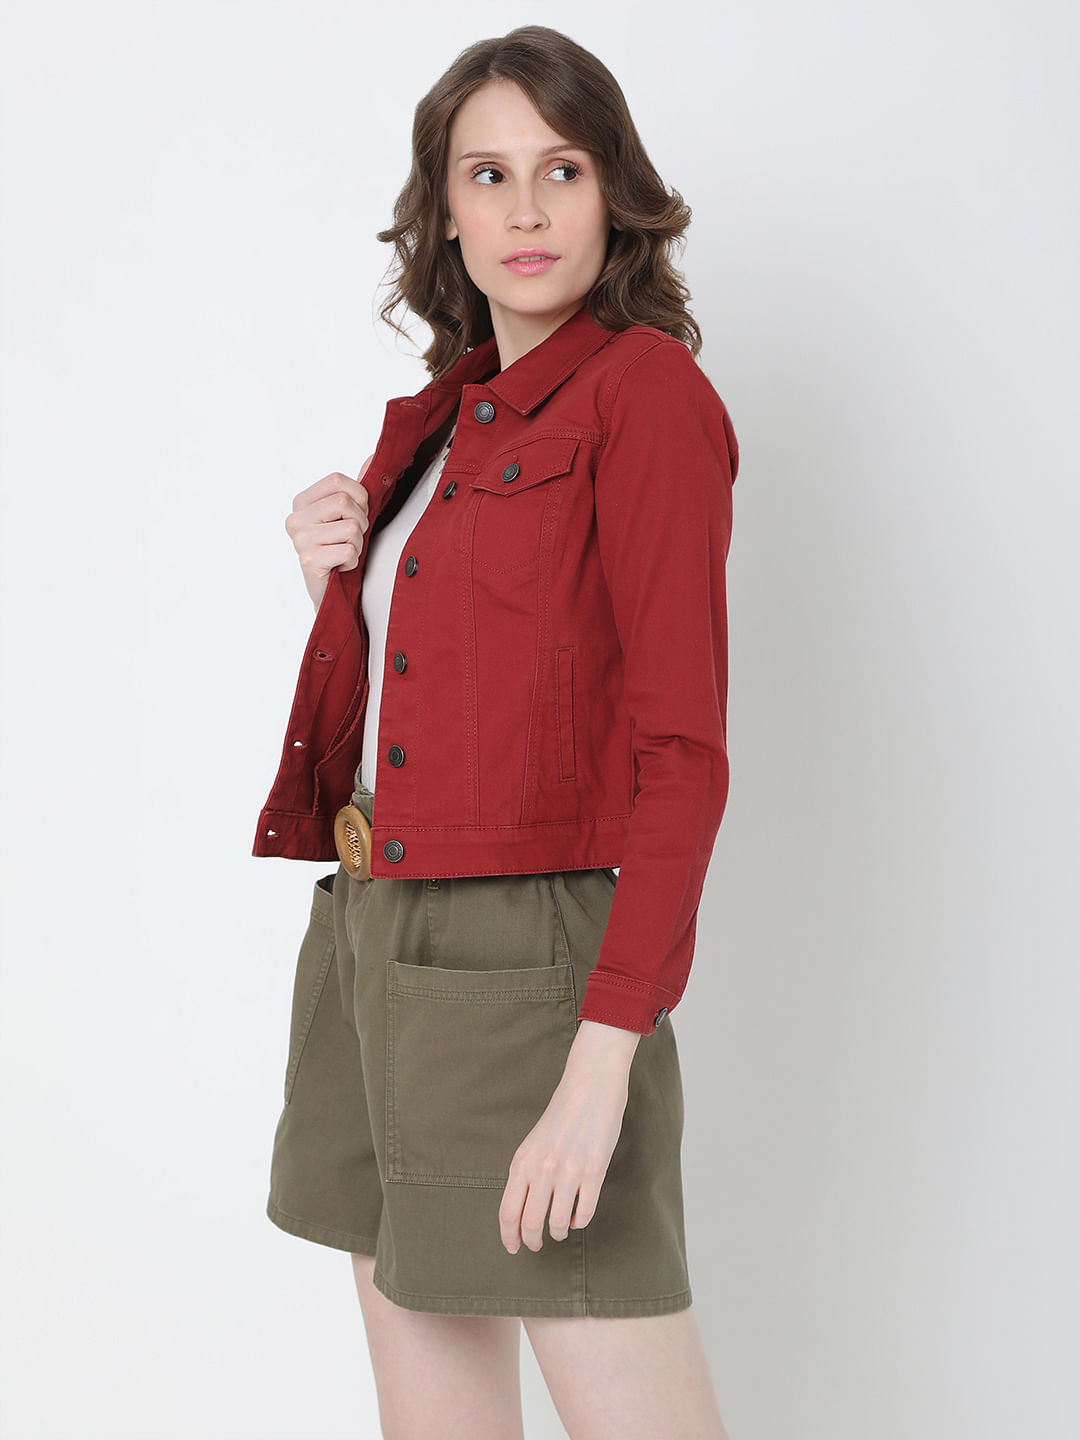 Buy Girls Jacket Maroon Colour Size (M) 38 at Amazon.in